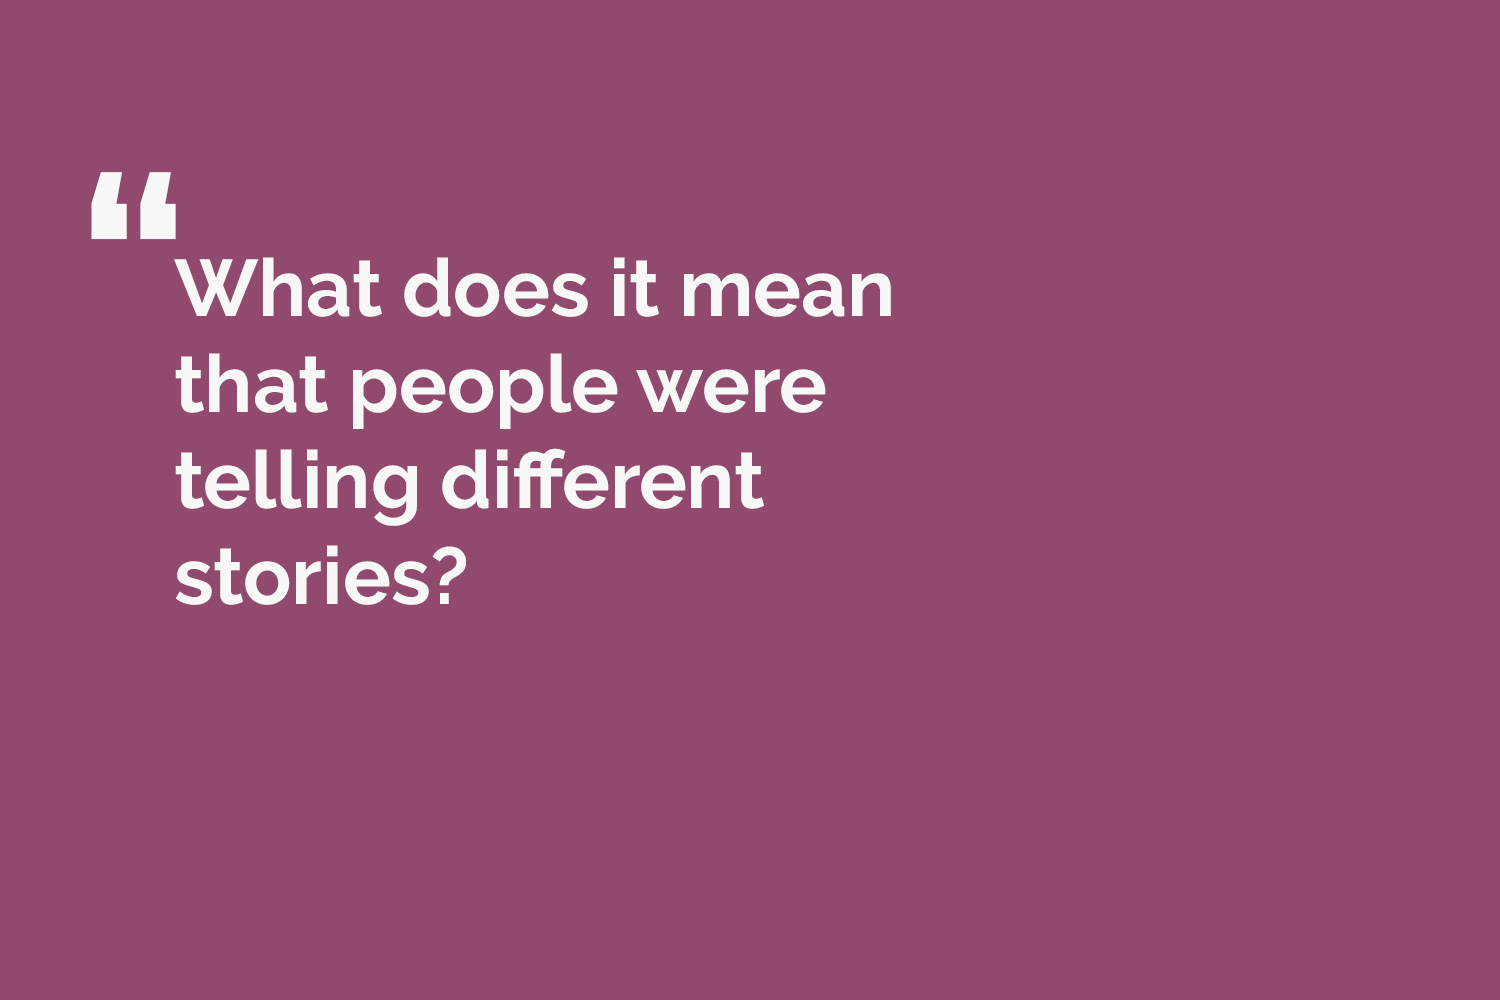 quote card reads: What does it mean that people were telling different stories?